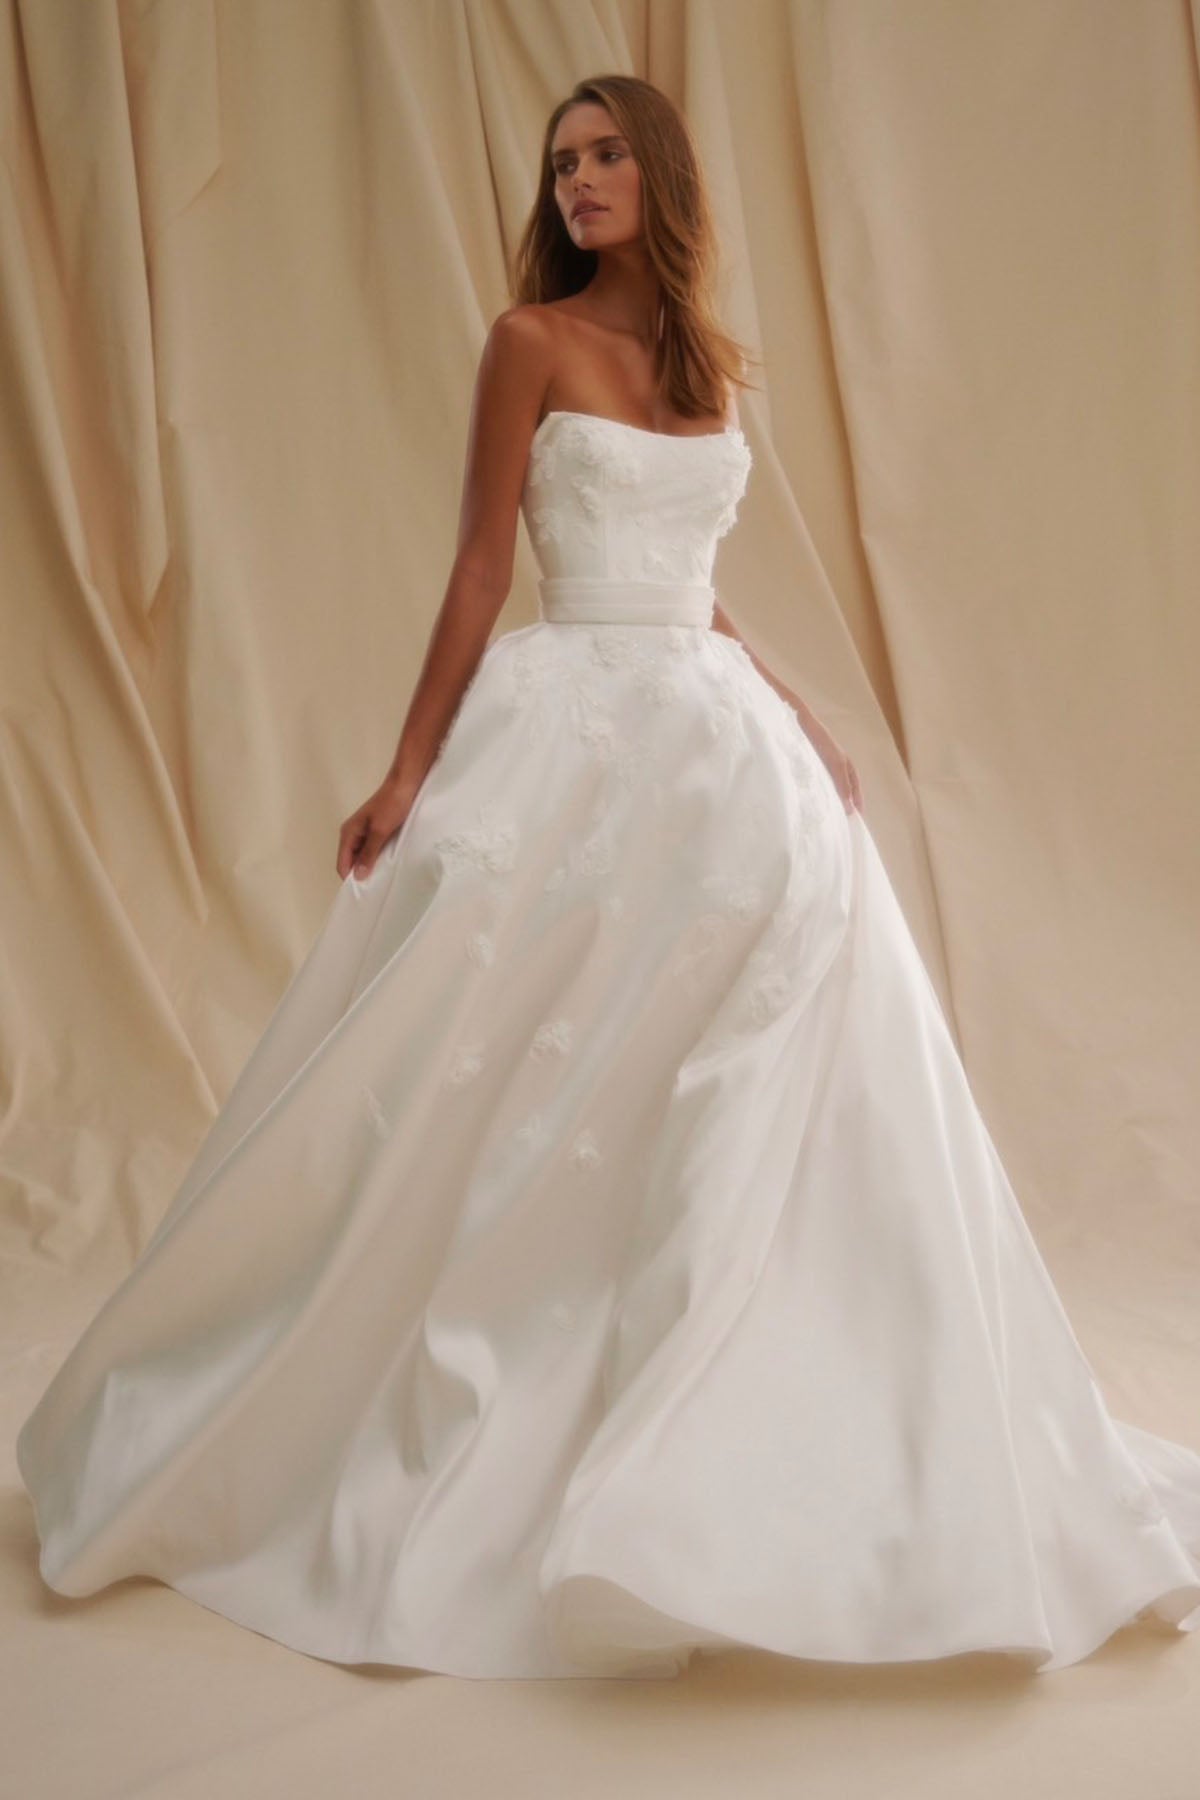 Strapless Mikado Gown with Lace Appliqués